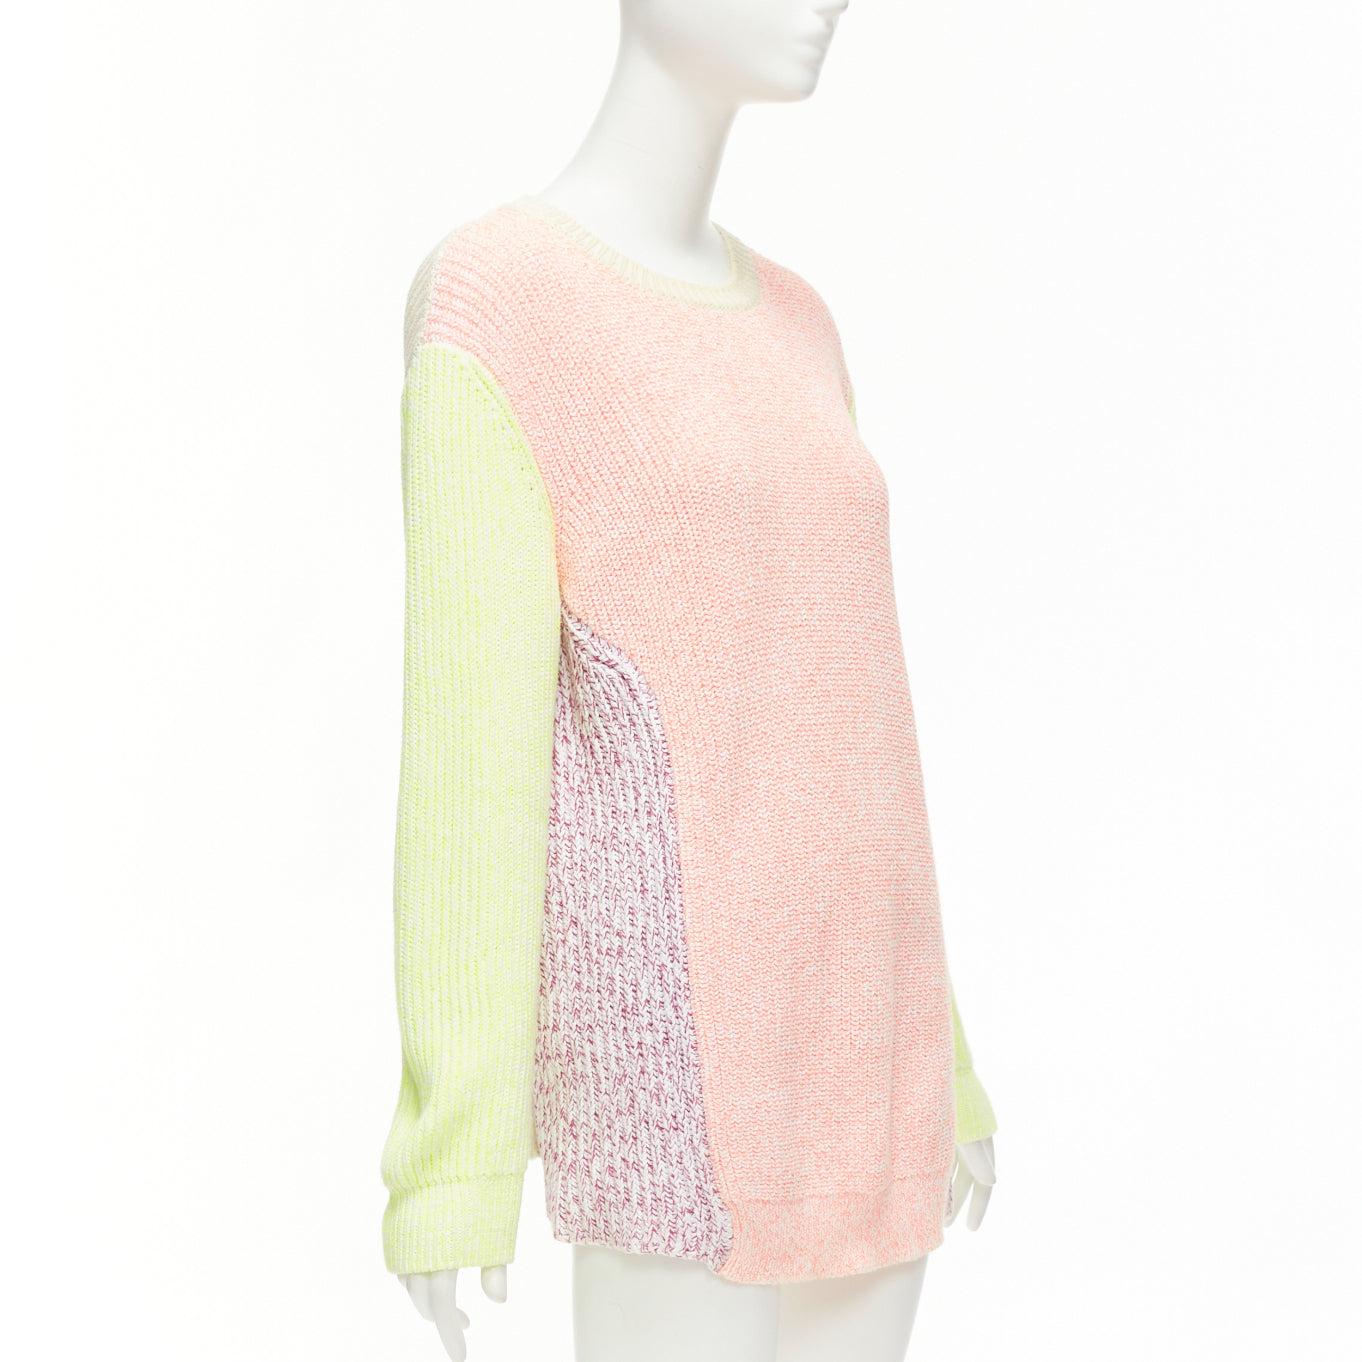 STELLA MCCARTNEY 2012 neon yellow orange cotton blend oversized sweater IT44 L
Reference: CNPG/A00060
Brand: Stella McCartney
Designer: Stella McCartney
Collection: 2012 - Runway
Material: Cotton, Blend
Color: Neon Yellow, Multicolour
Pattern: